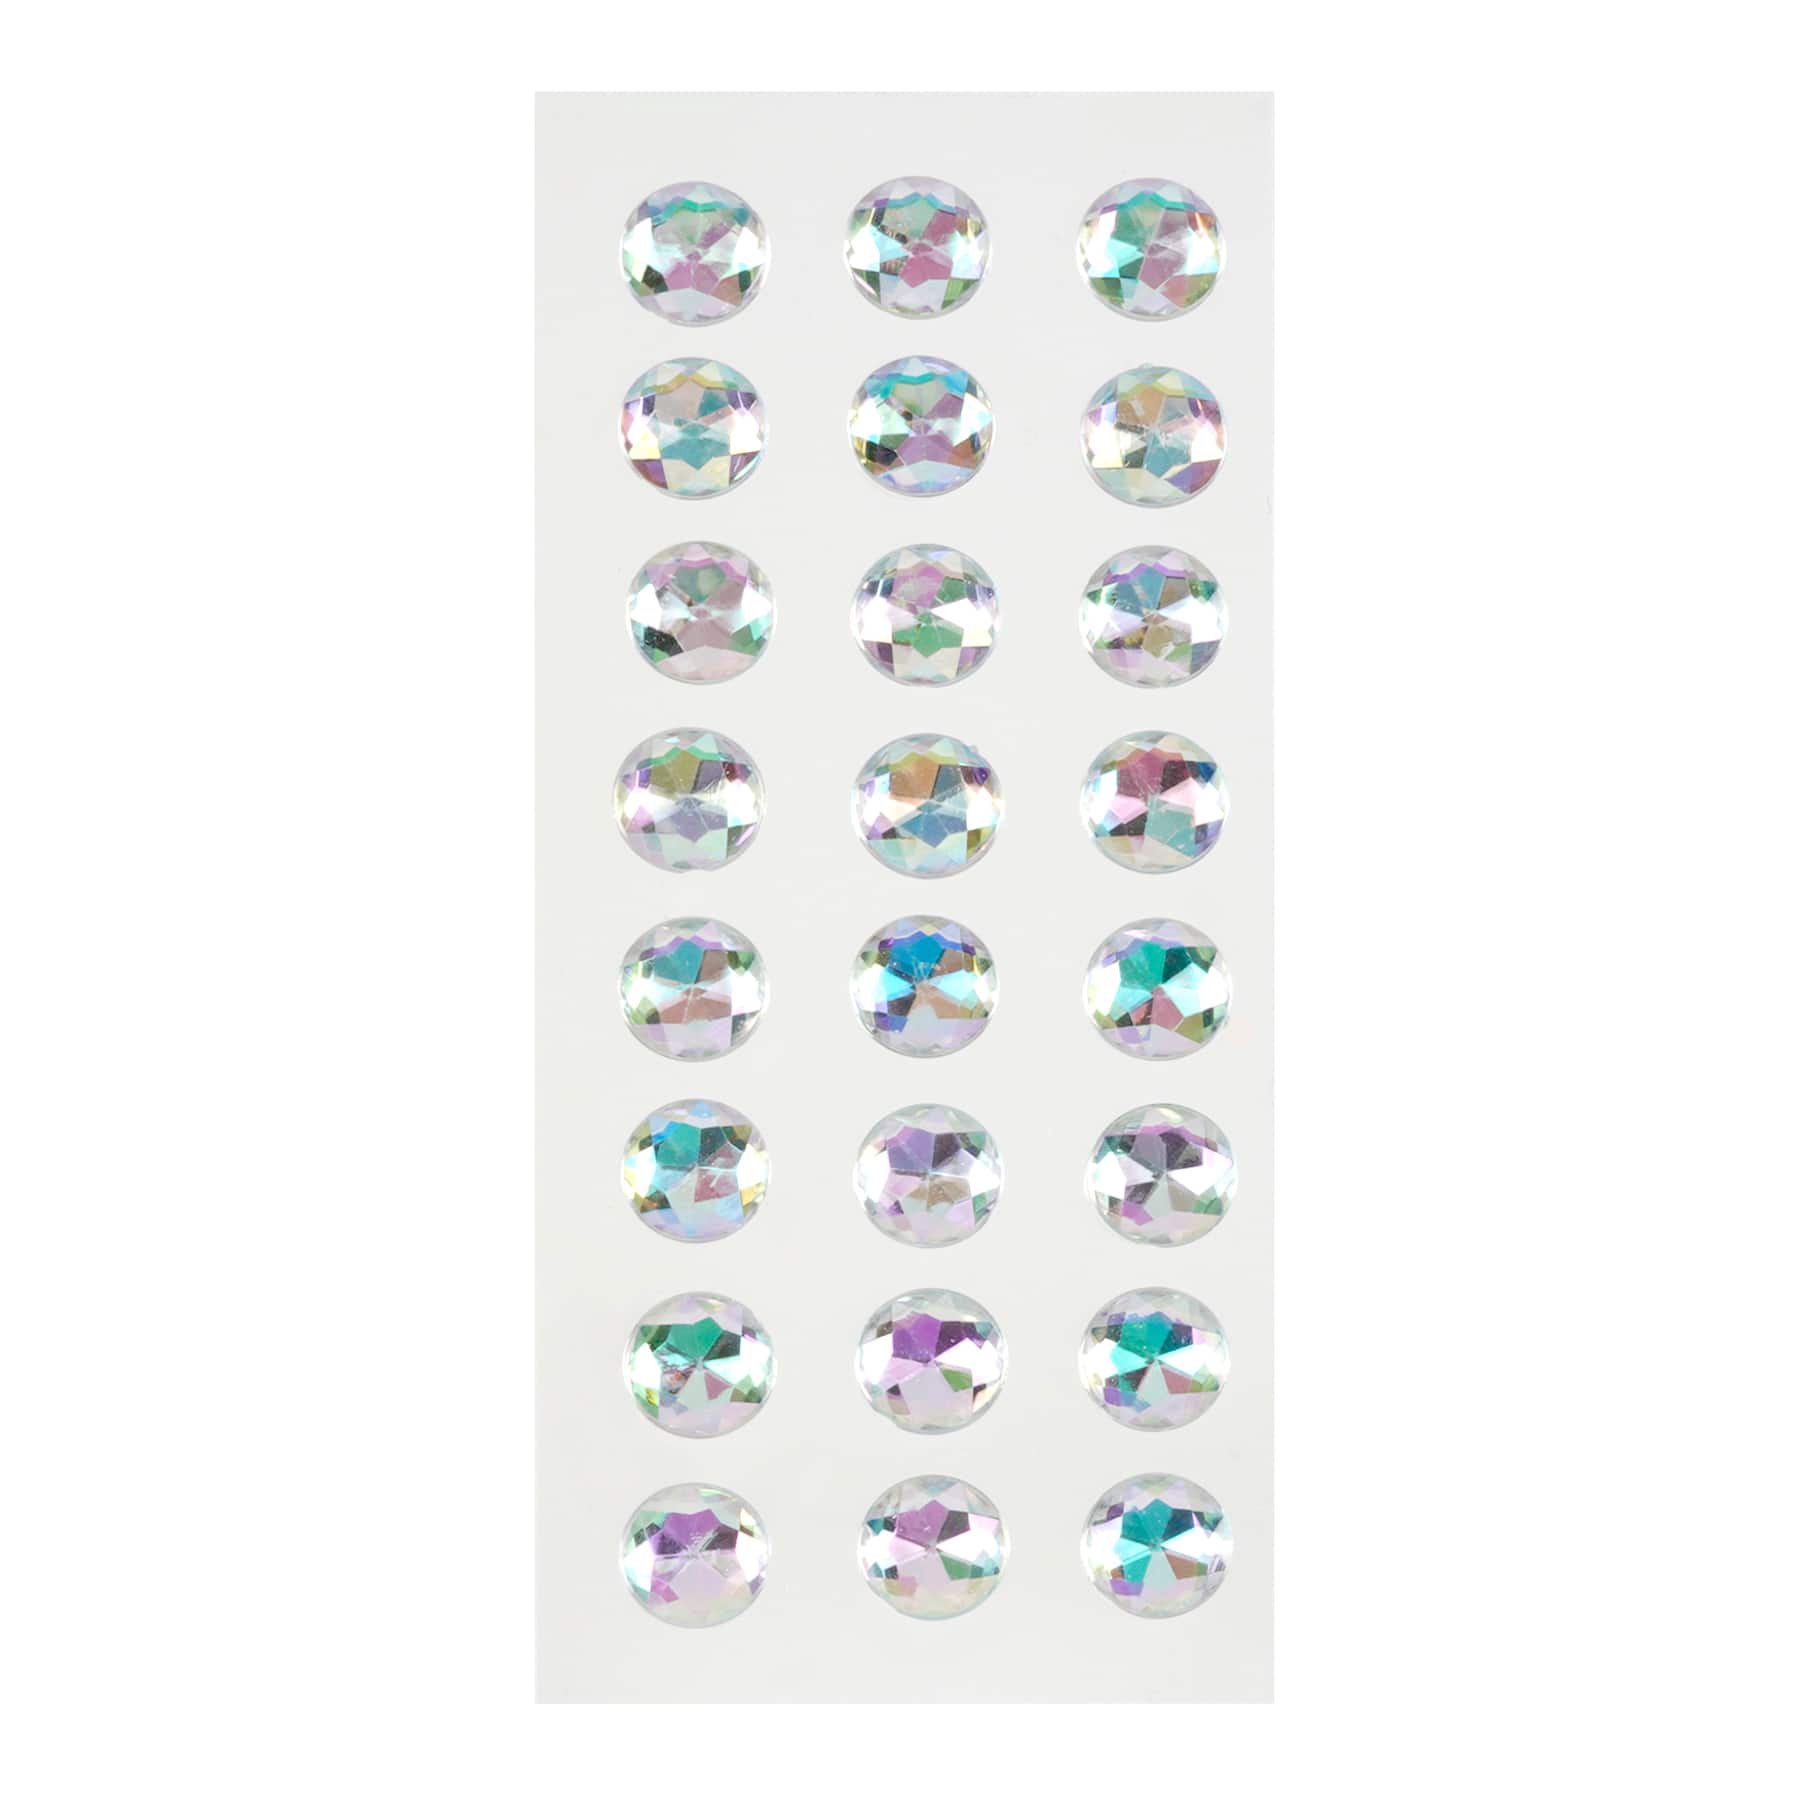 Buy in Bulk - 12 Pack: Clear Round Rhinestone Stickers by Recollections ...